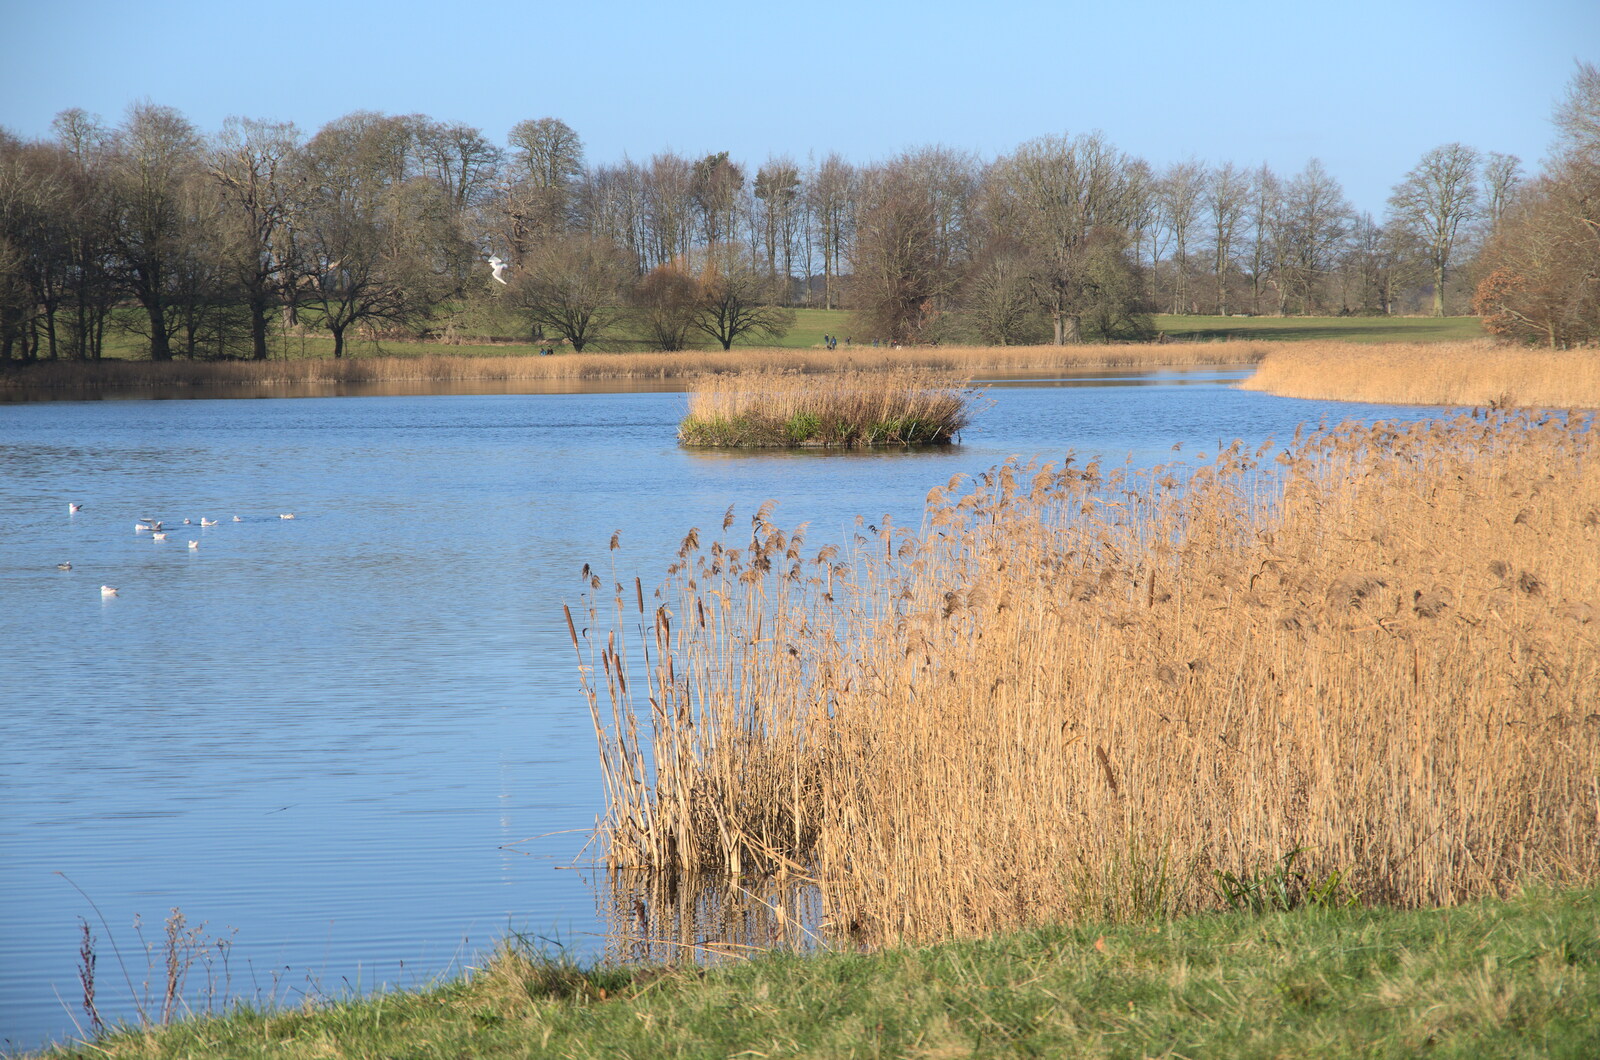 The lake by the hall from A Visit to Blickling Hall, Aylsham, Norfolk - 9th January 2022